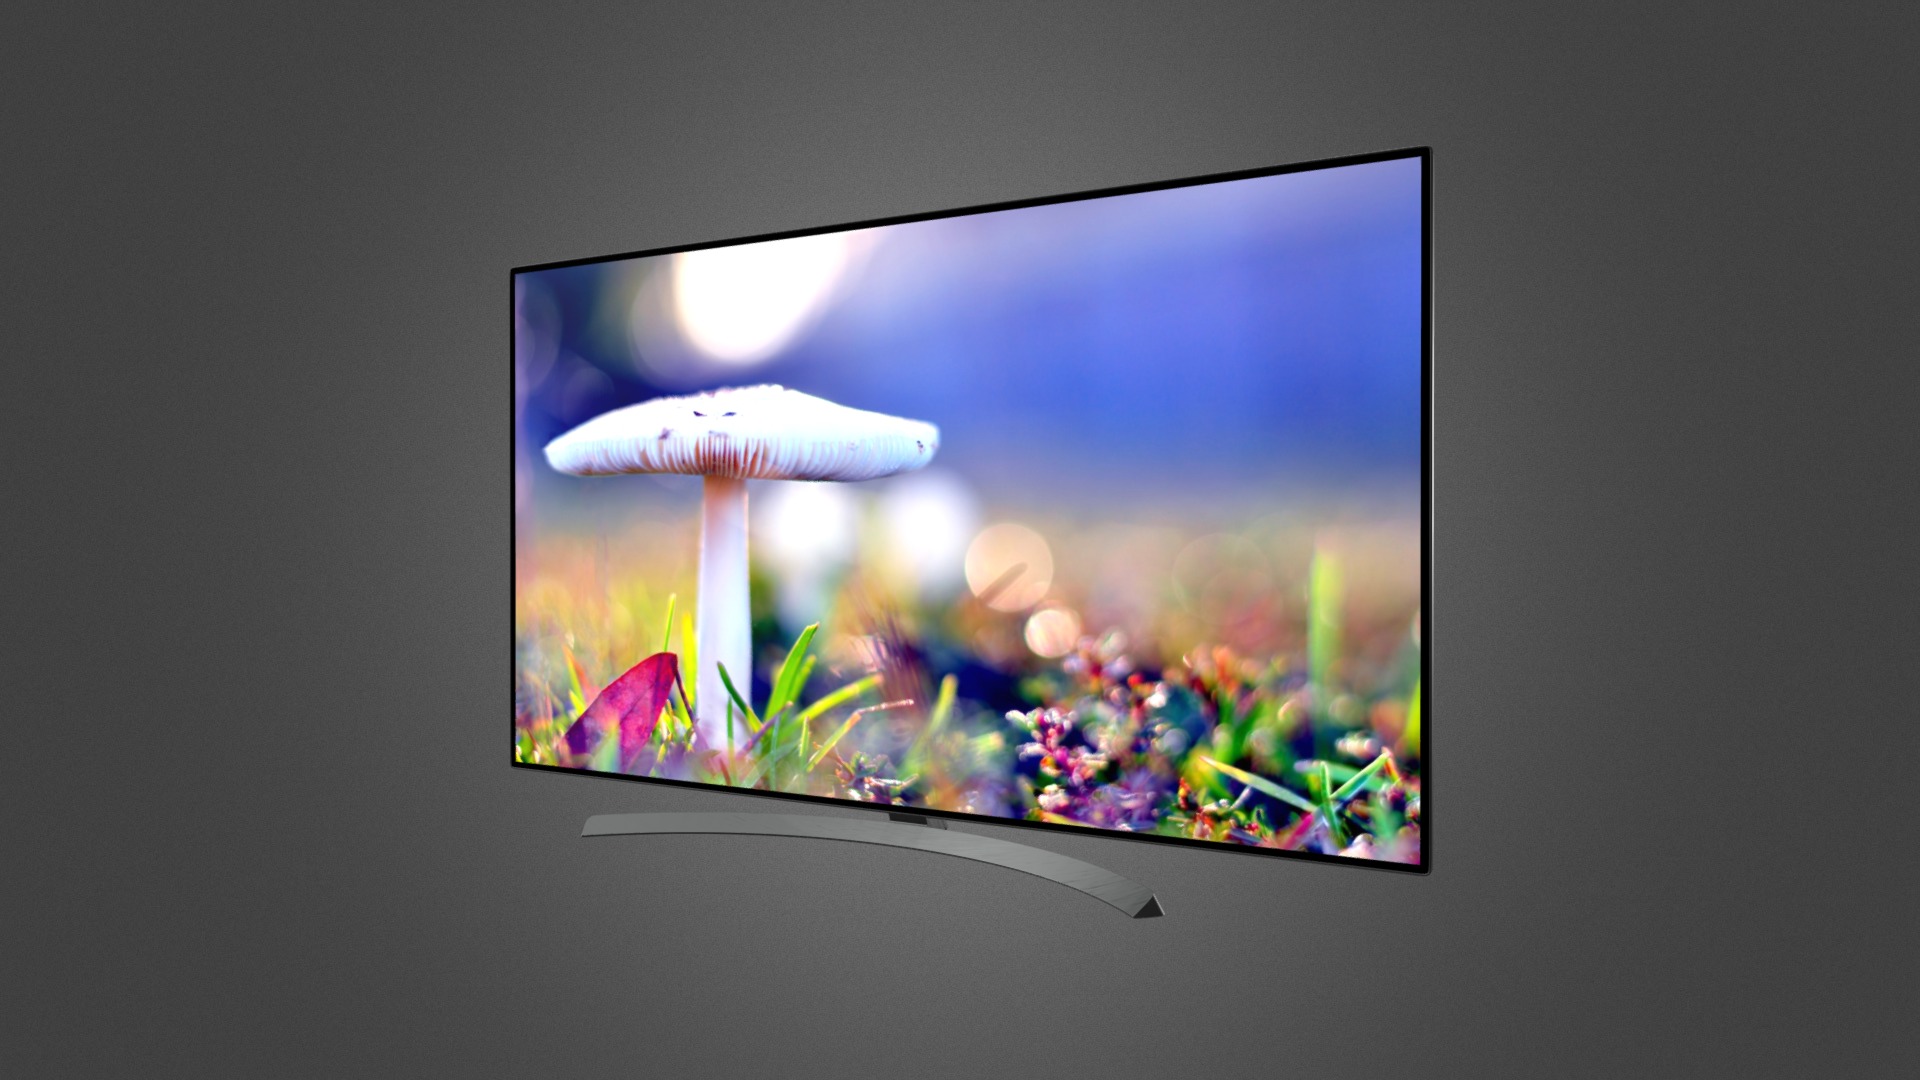 3D model LG UH8500 TV for Element 3D - This is a 3D model of the LG UH8500 TV for Element 3D. The 3D model is about a television screen with a lamp.